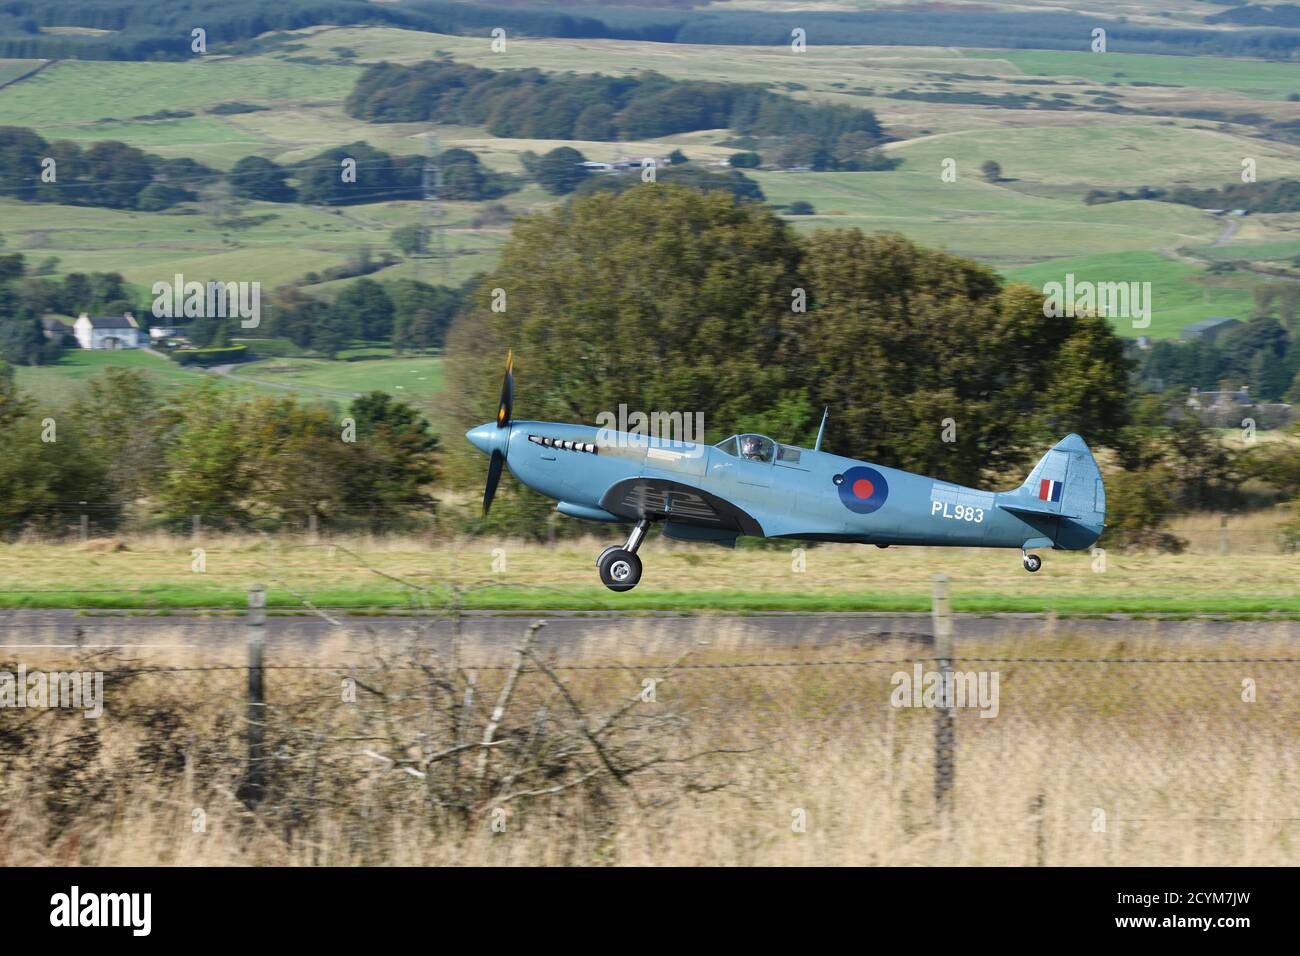 A WW2 Spitfire aircraft takes off from Cumbernauld Airport, Scotland on a tour of the UK to celebrate the Battle of Britain and the NHS. Stock Photo